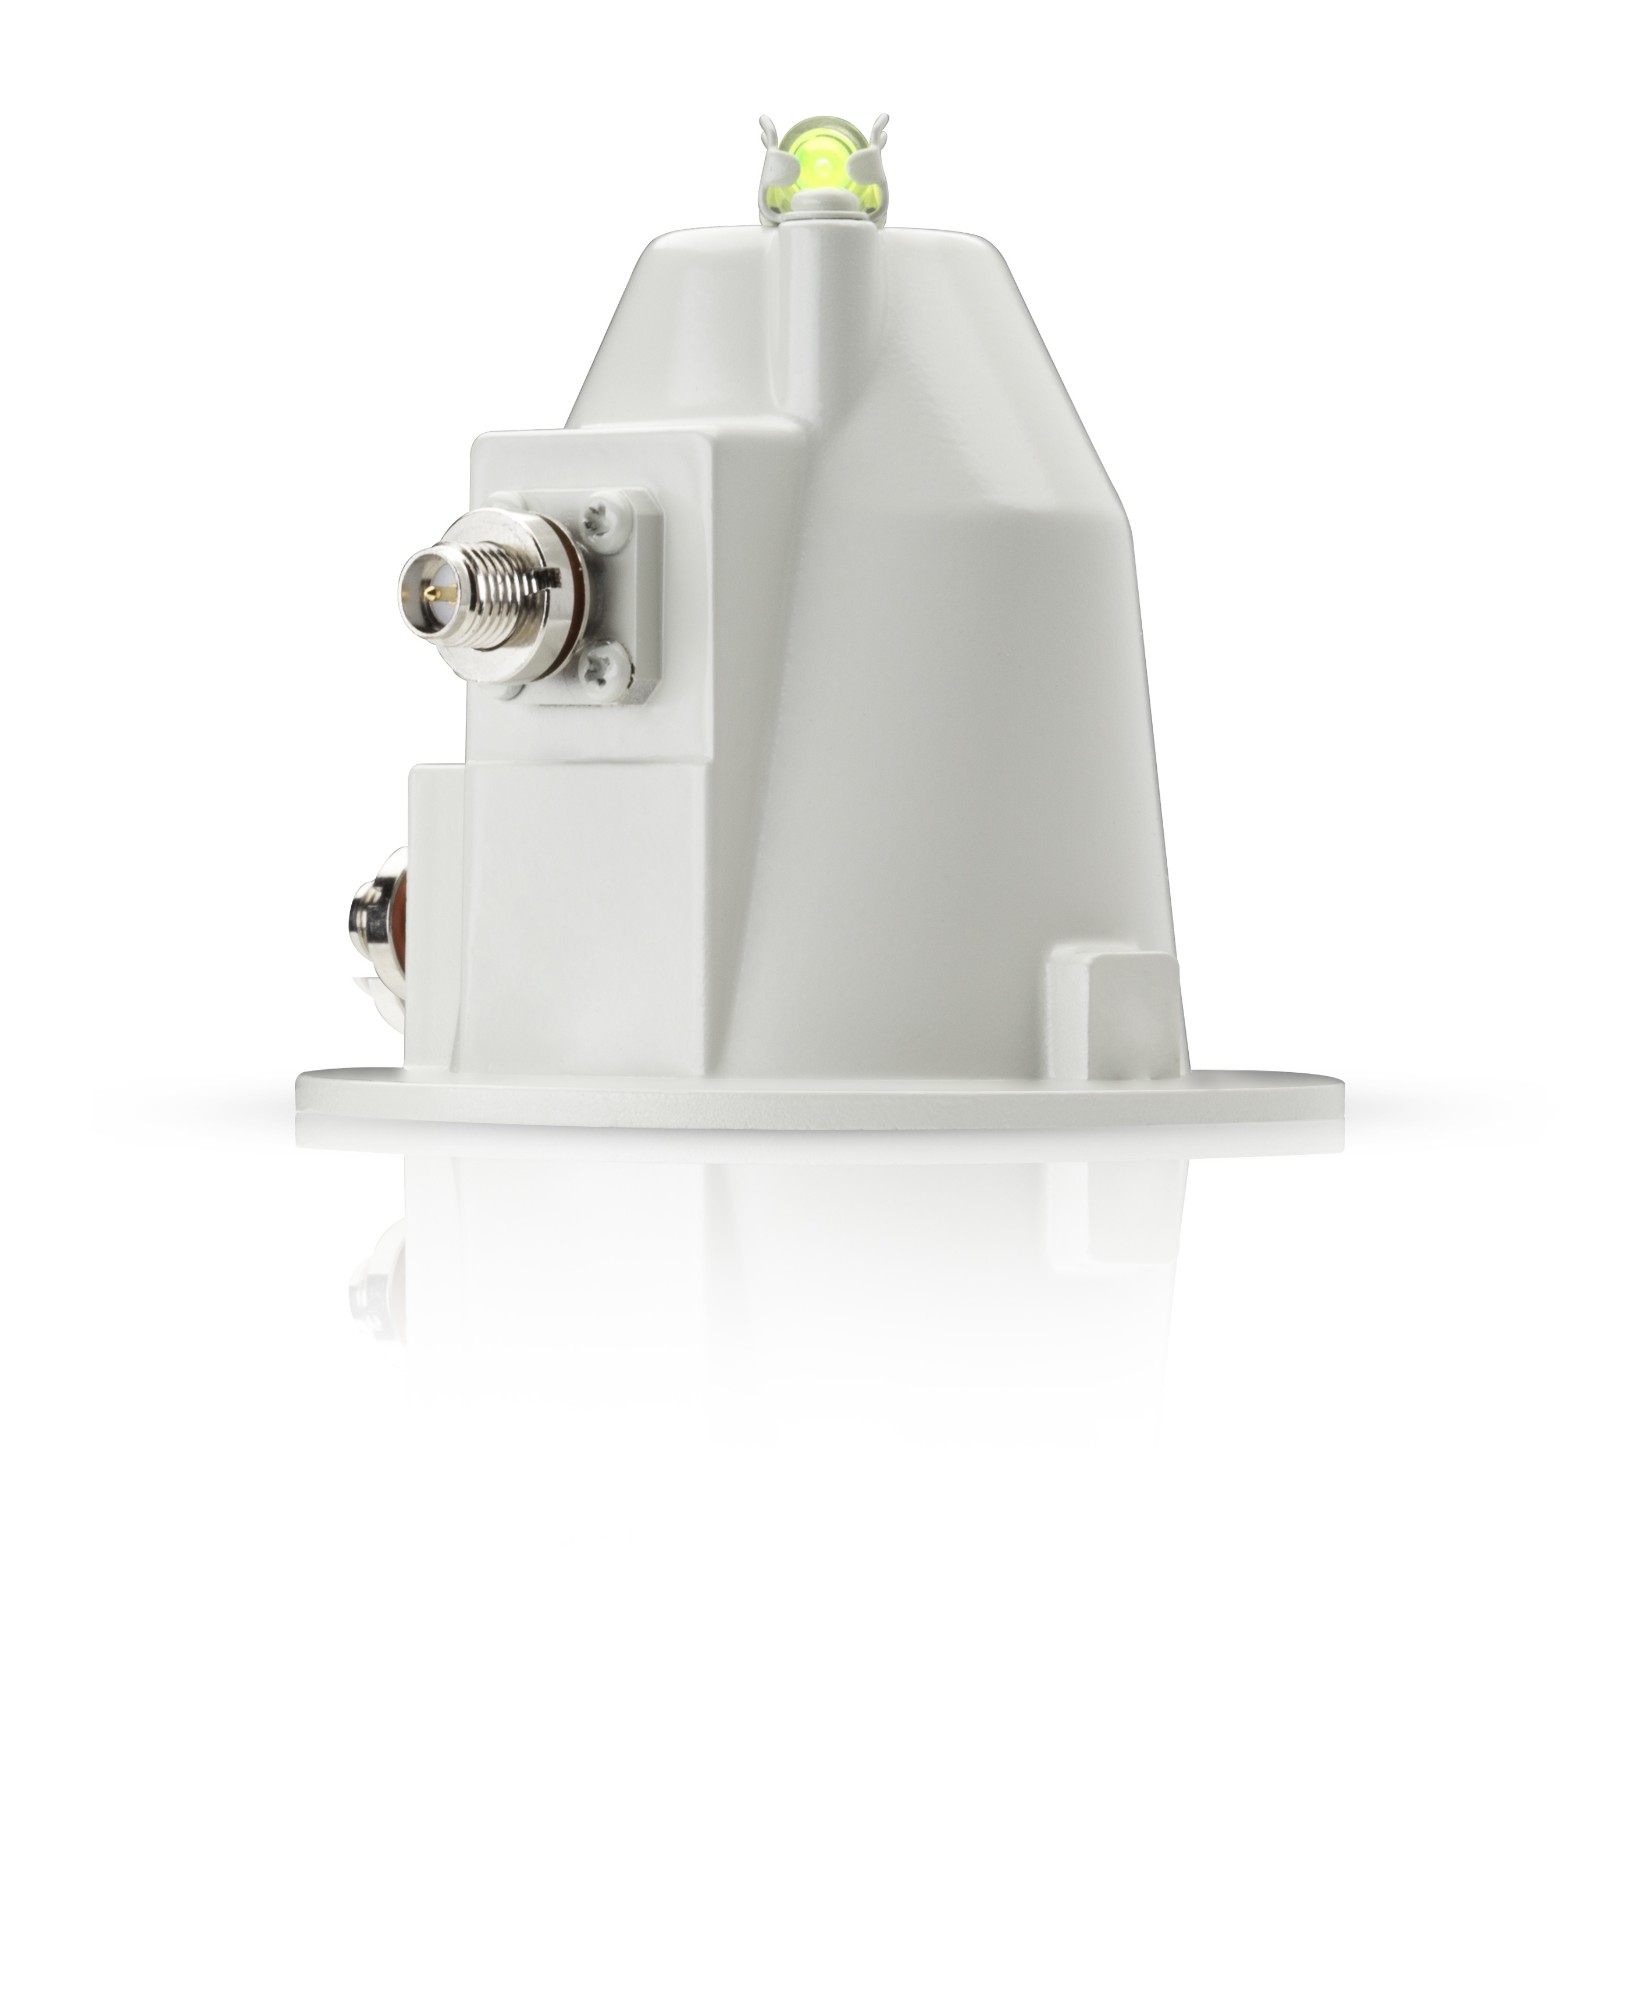 Ubiquiti Networks AF-5G-OMT-S45 network antenna accessory